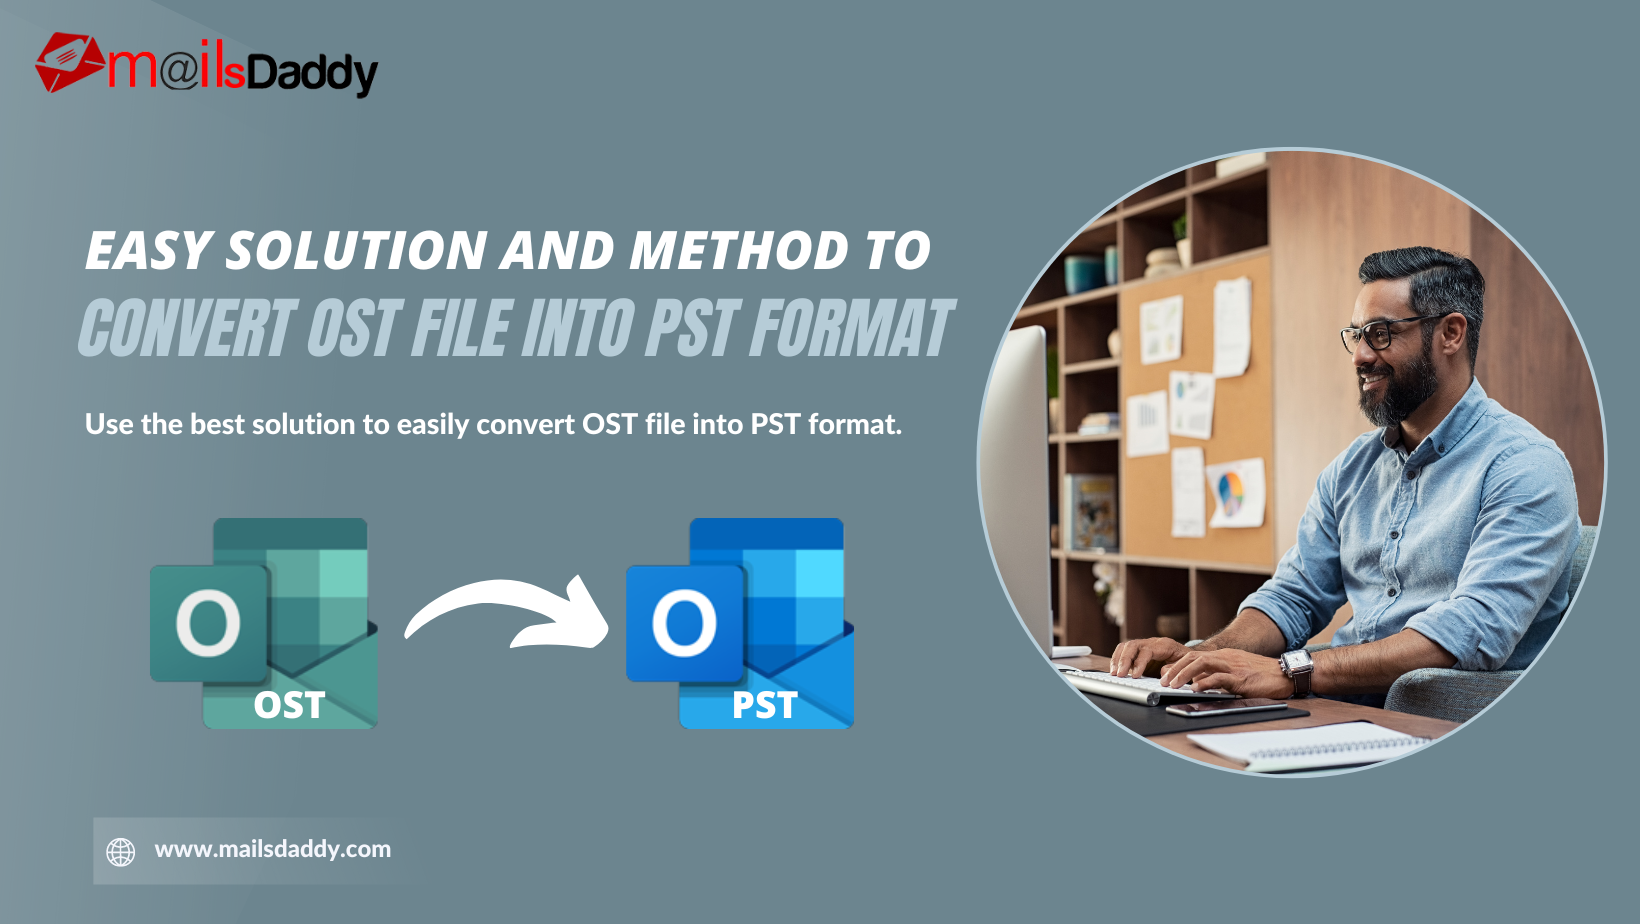 convert ost file into pst